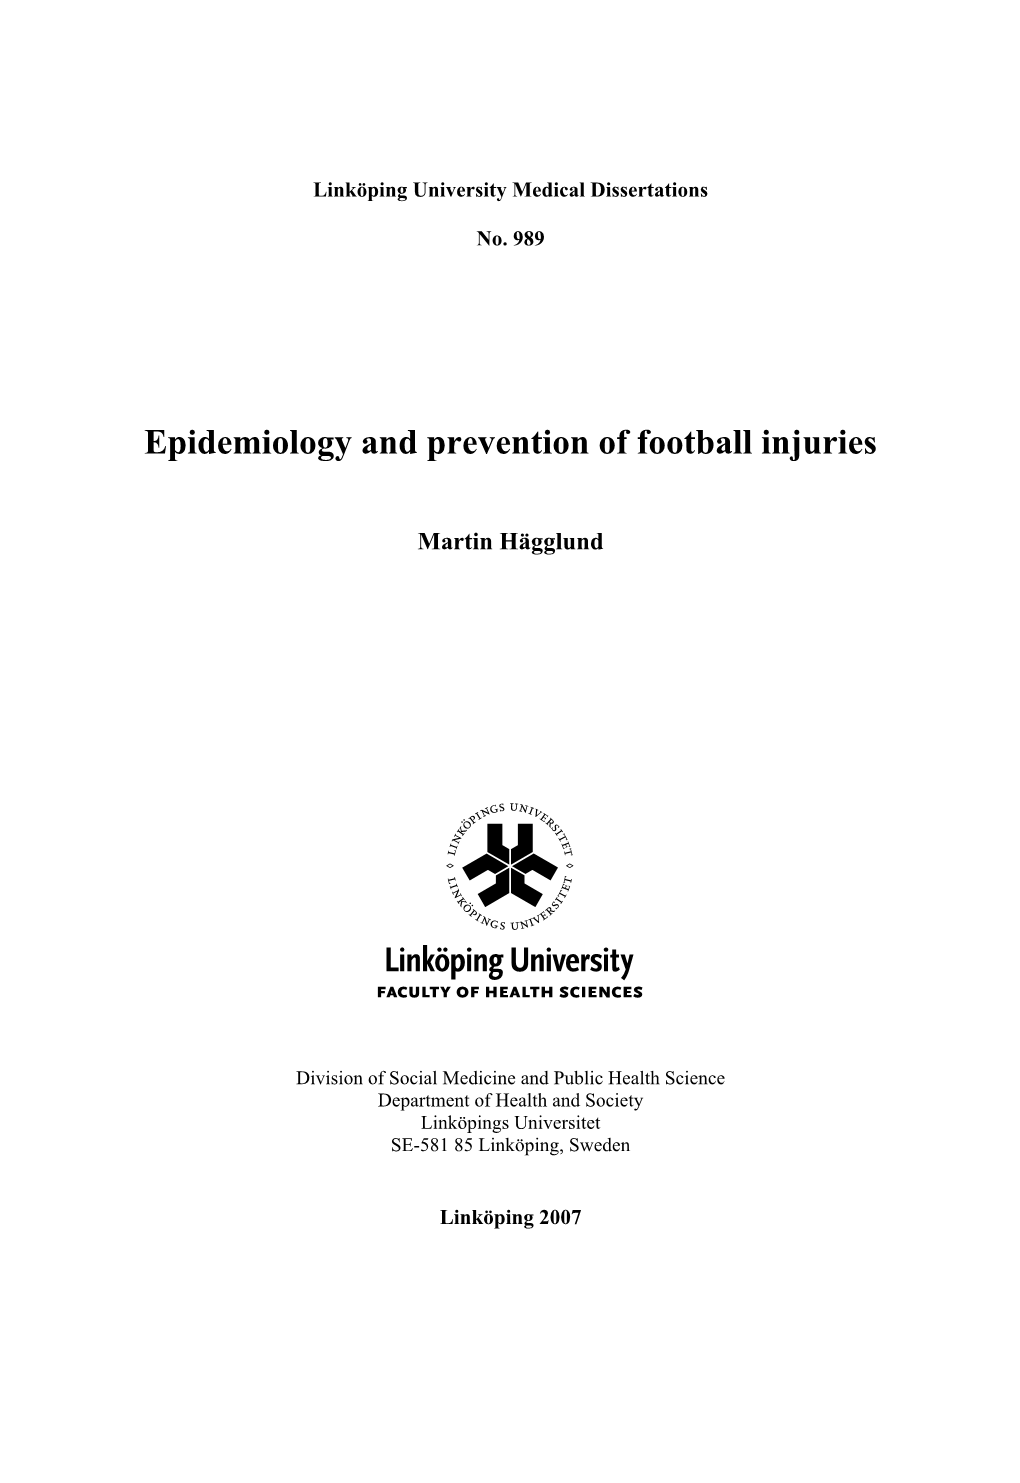 Epidemiology and Prevention of Football Injuries